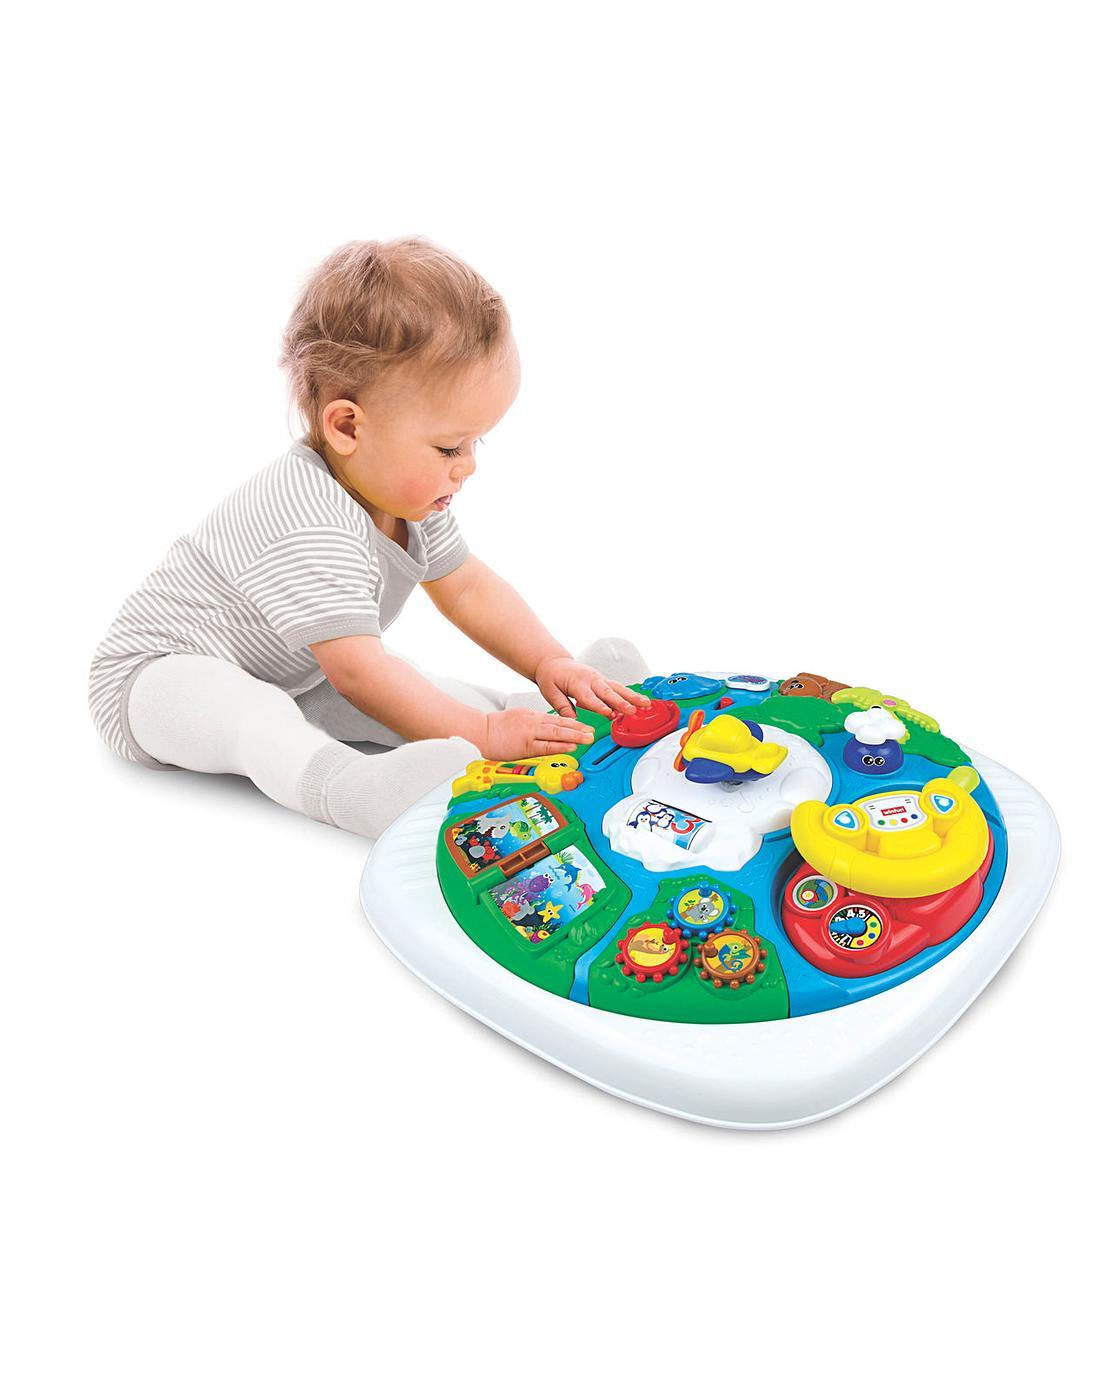 Winfun Globetrotter Activity Table 000876